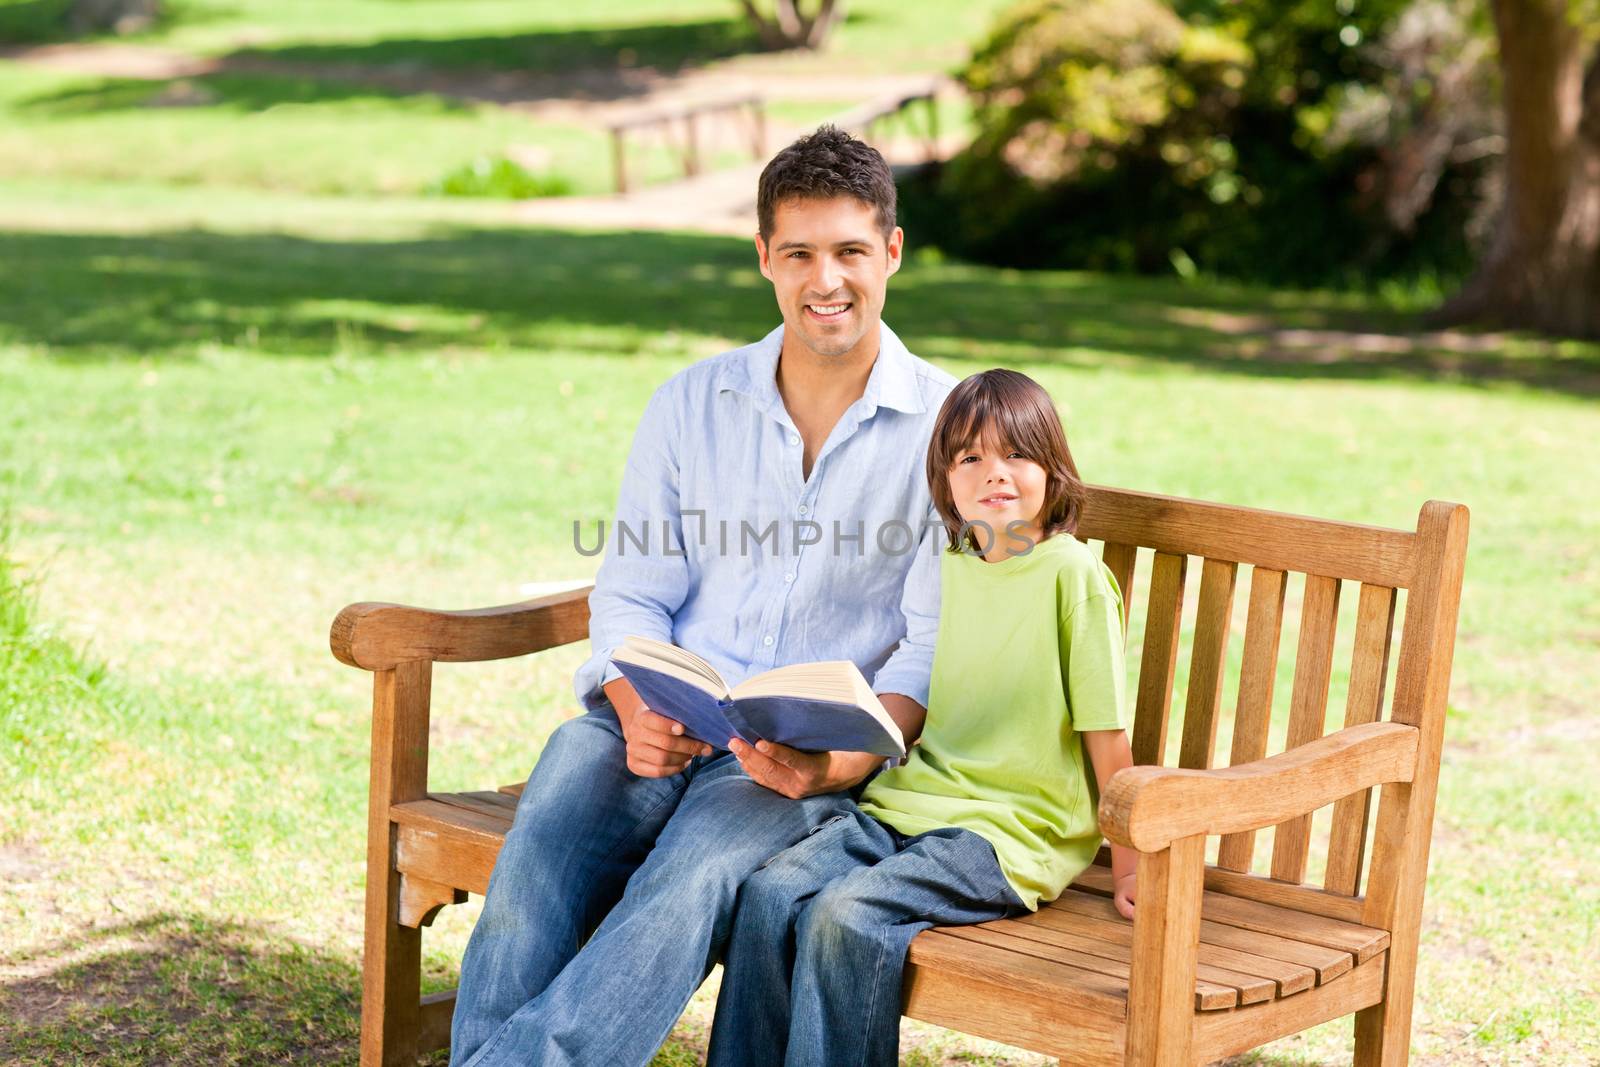 Son with his father reading a book during the summer